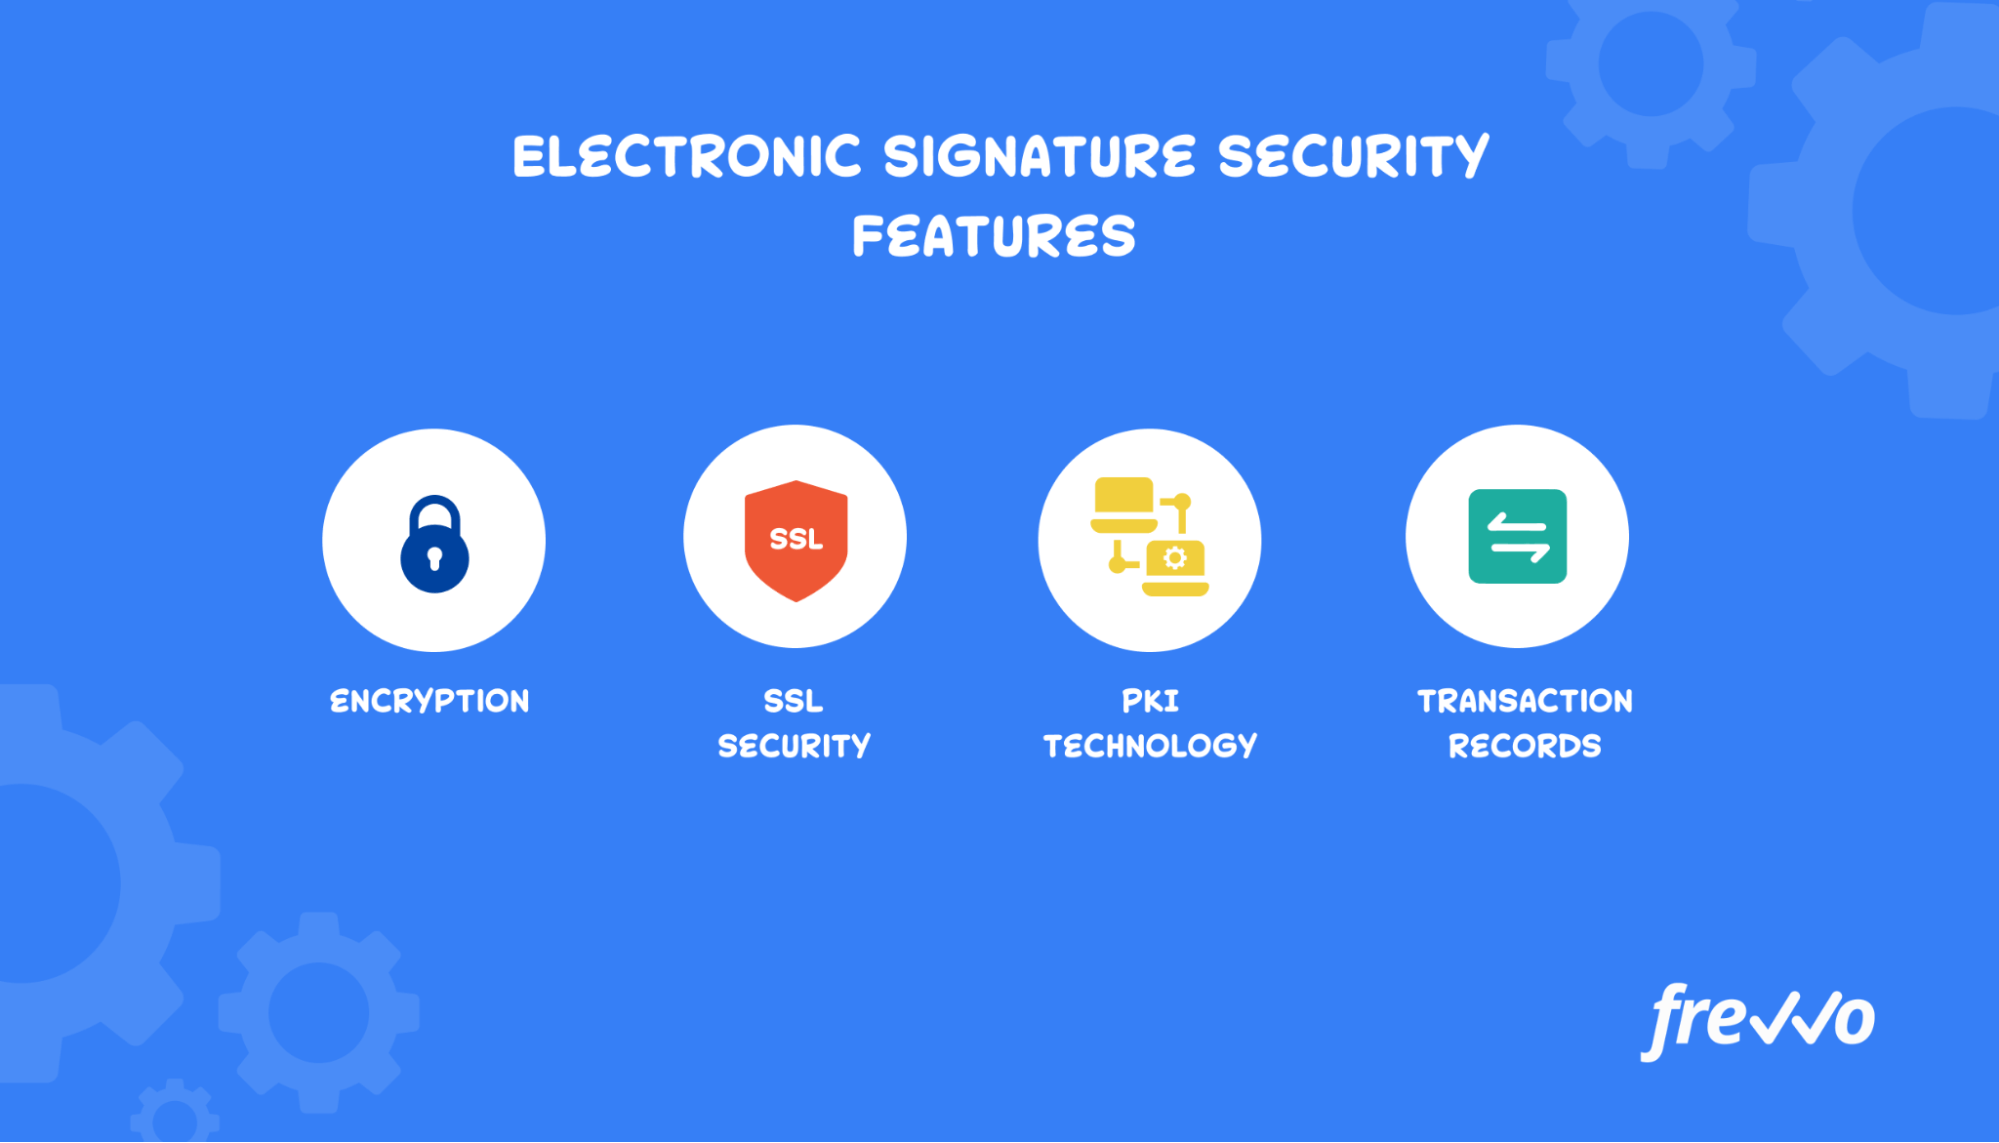 icons showing security features to looking for in document signing software, including encryption, SSL security, and PKI technology